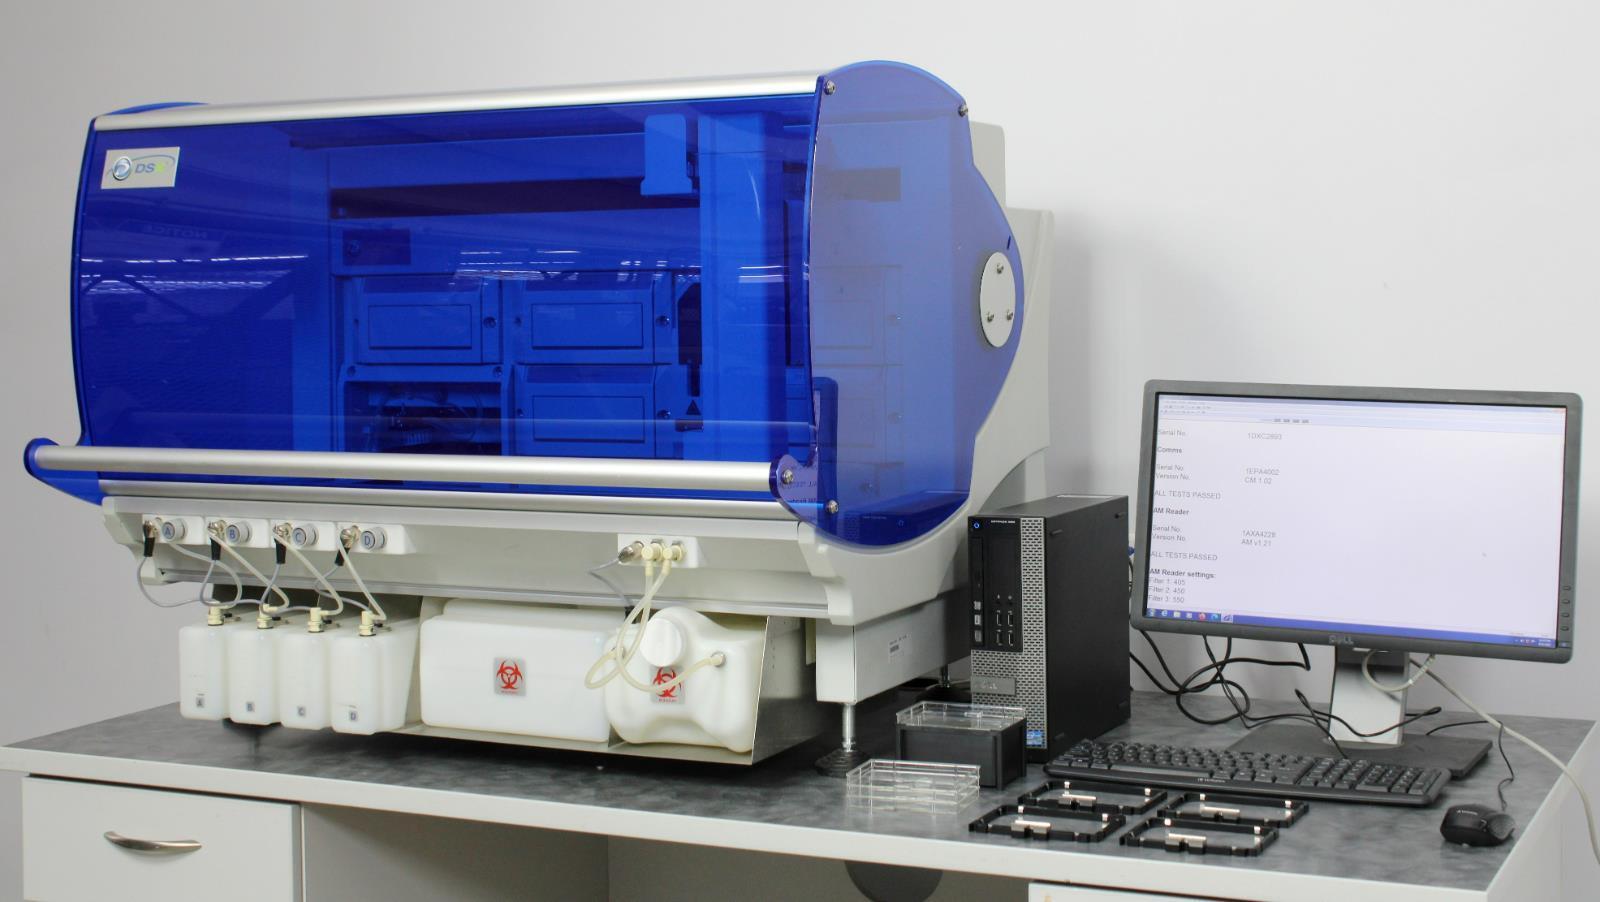 Dynex DSX 4-Plate Automated ELISA Processing System w/ PC & Revelation Software | eBay